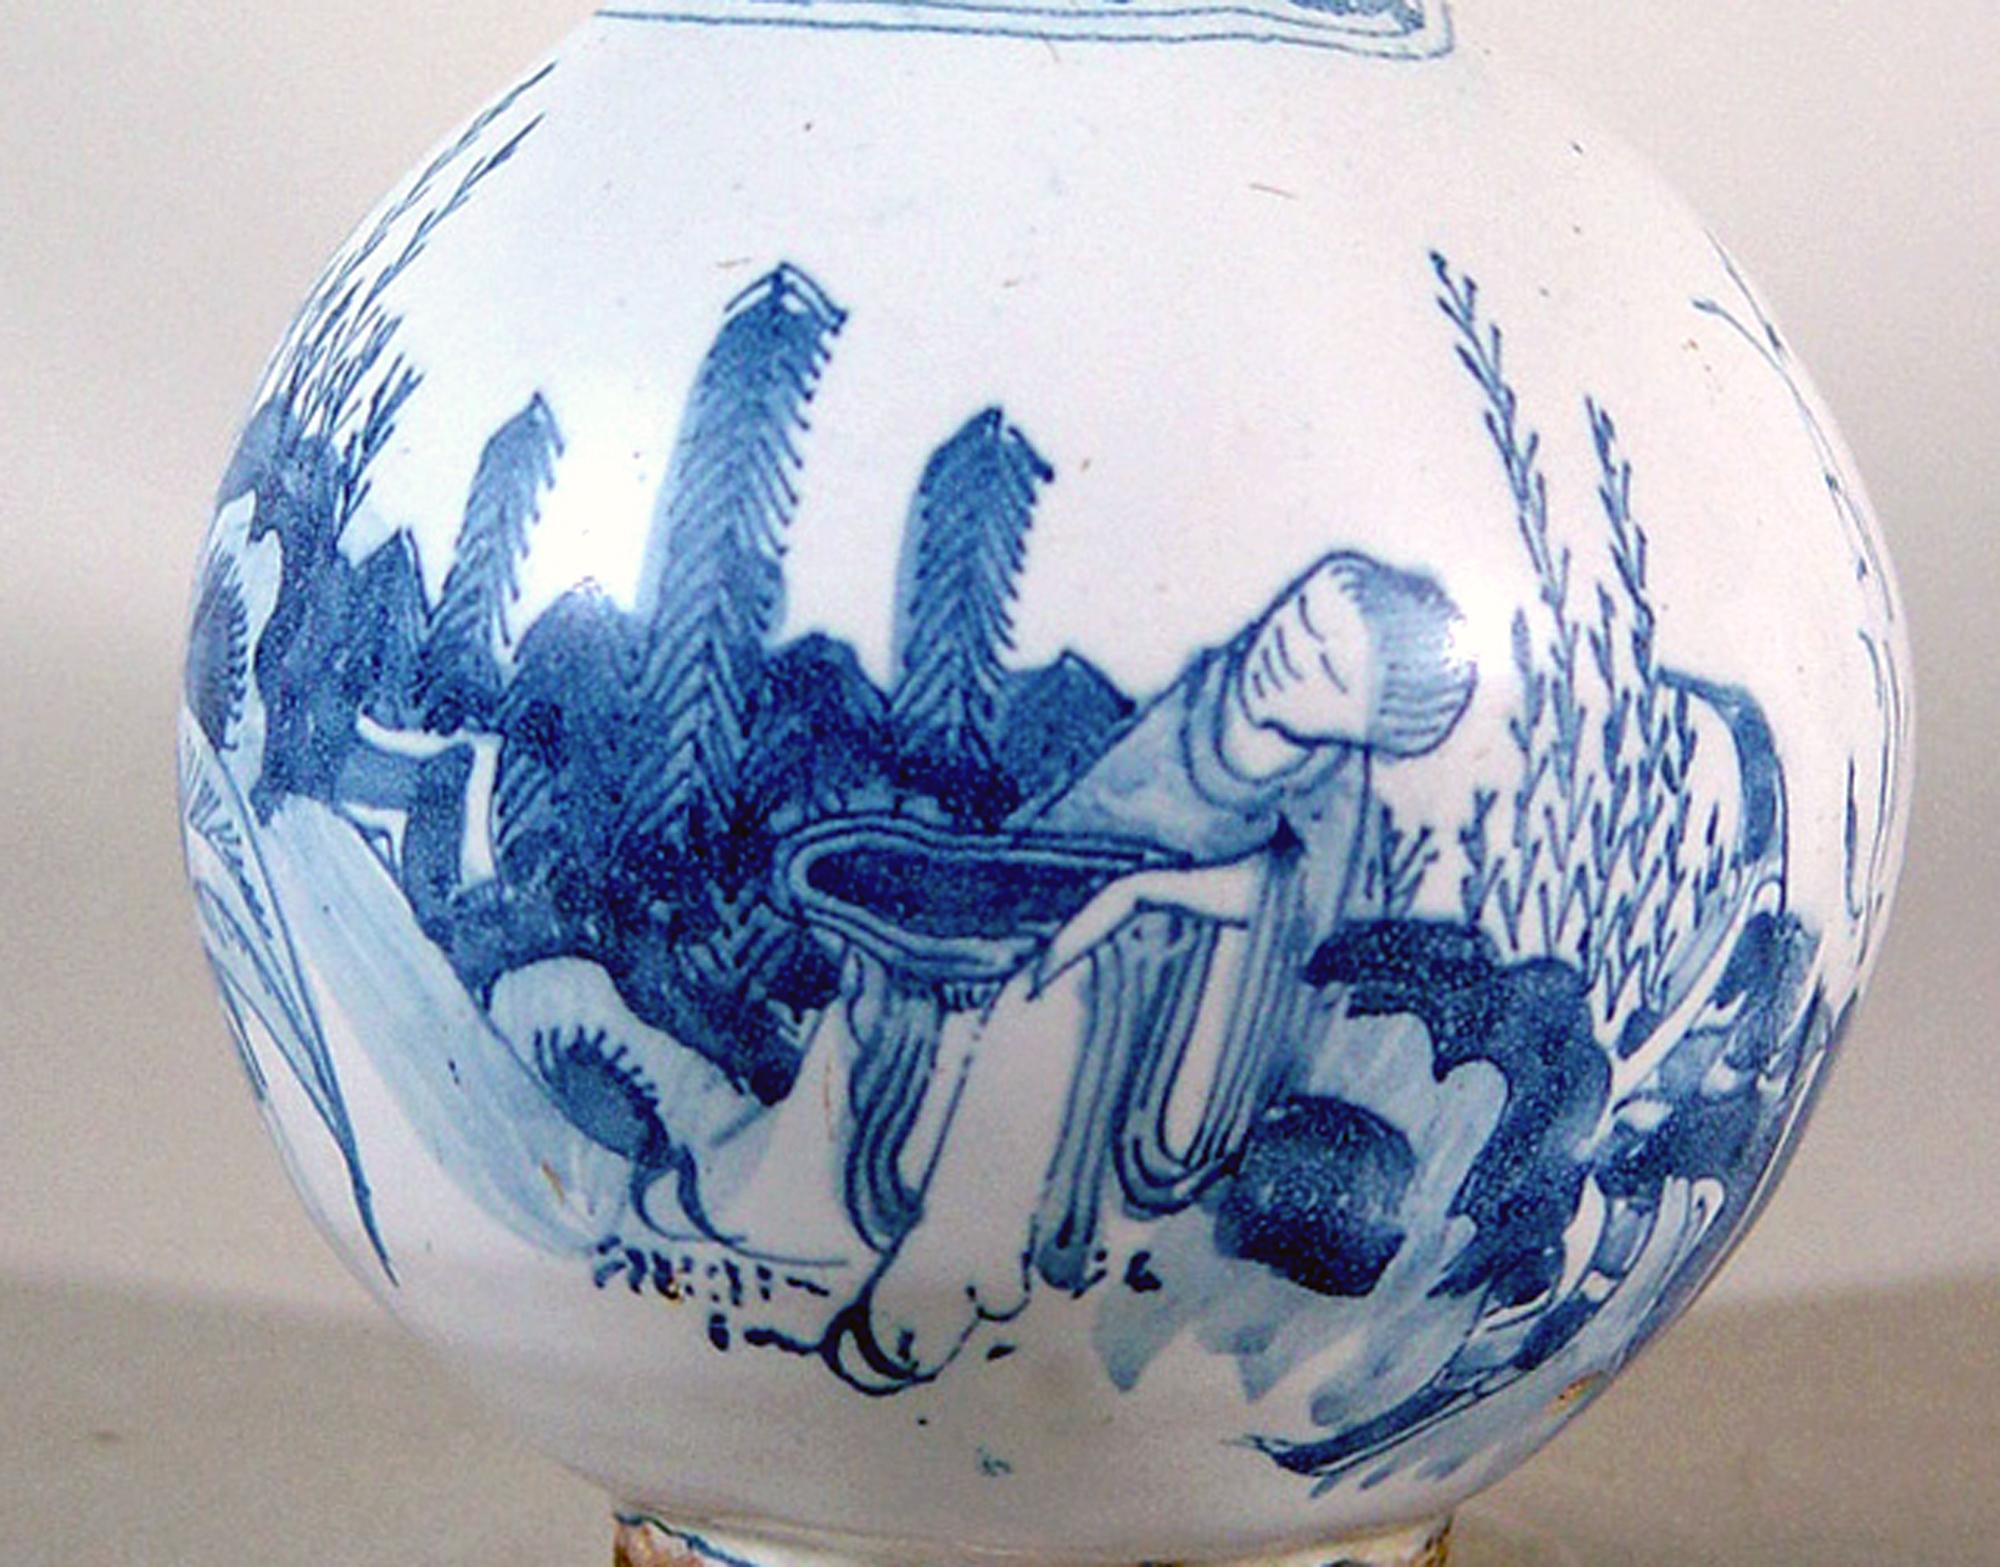 17th century Frankfurt German Faience Blue & White chinoiserie Trumpet-neck Bottle Vase,
circa 1680-90.

The vase is decorated in underglaze blue and white with a chinoiserie landscape with a Chinese figure with banana plants and stylized